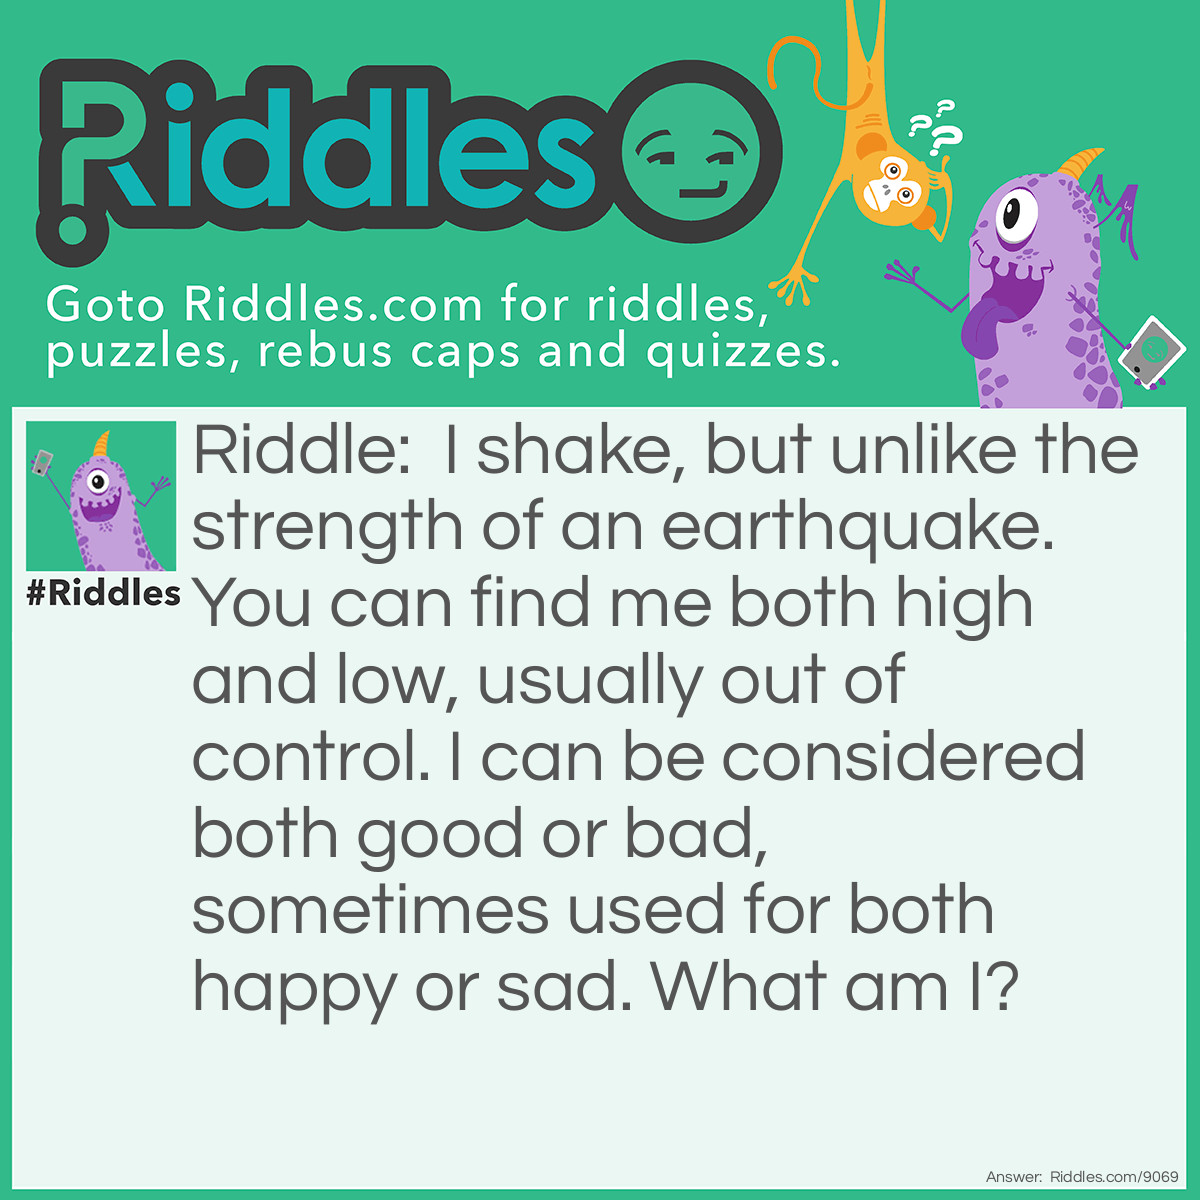 Riddle: I shake, but unlike the strength of an earthquake. You can find me both high and low, usually out of control. I can be considered both good or bad, sometimes used for both happy or sad. What am I? Answer: Singing Pitch.